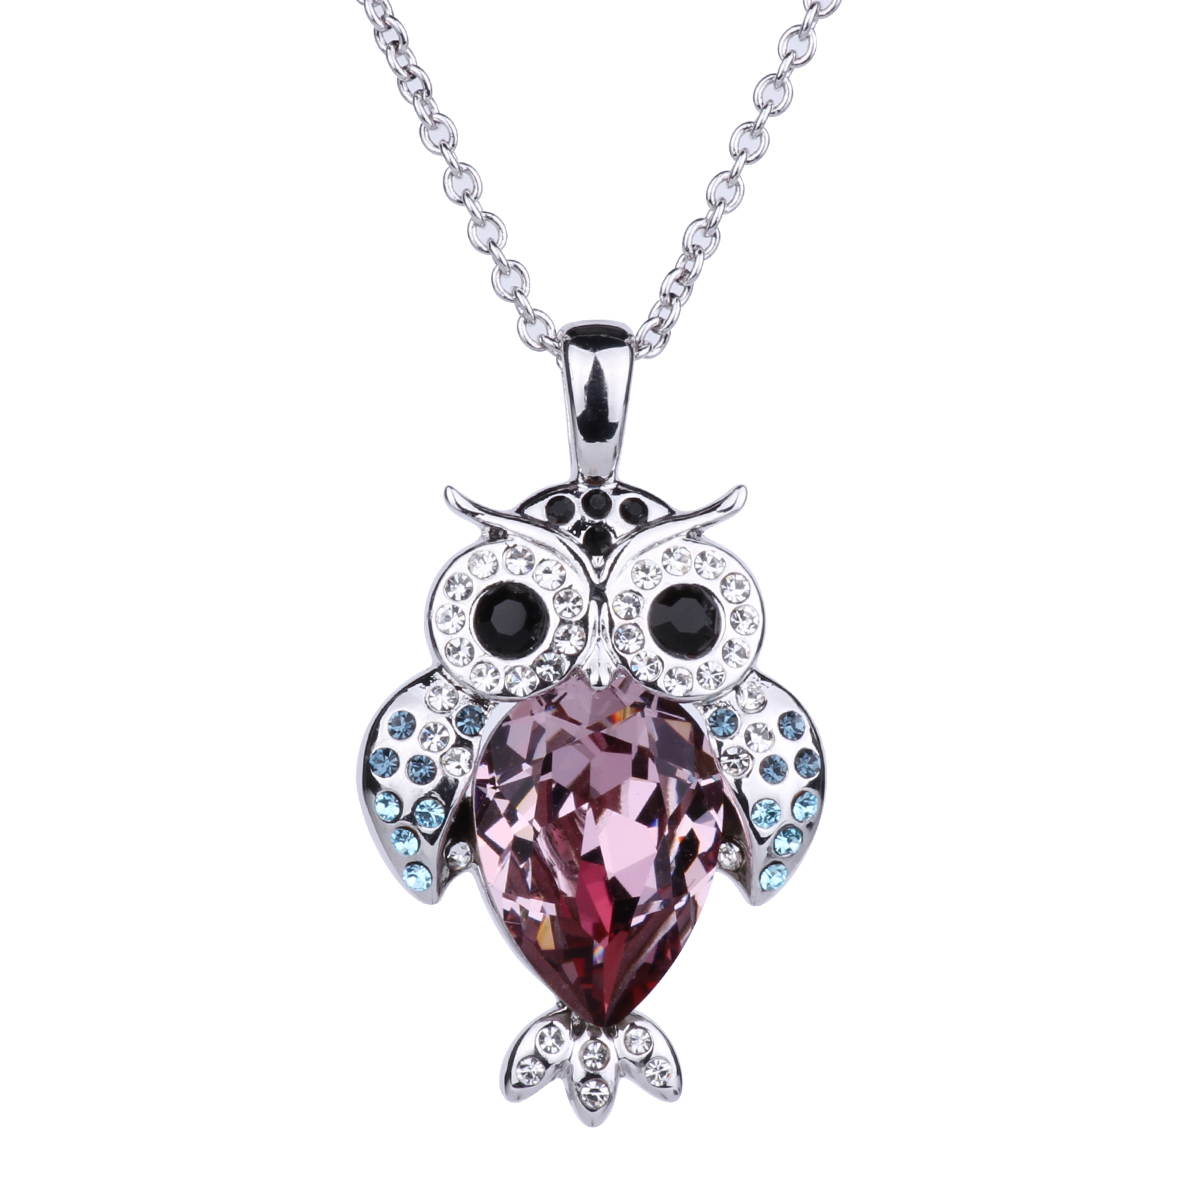 Alloy Owl Crystal Pendant Necklace Girl Kids Gift Rhodium-plated